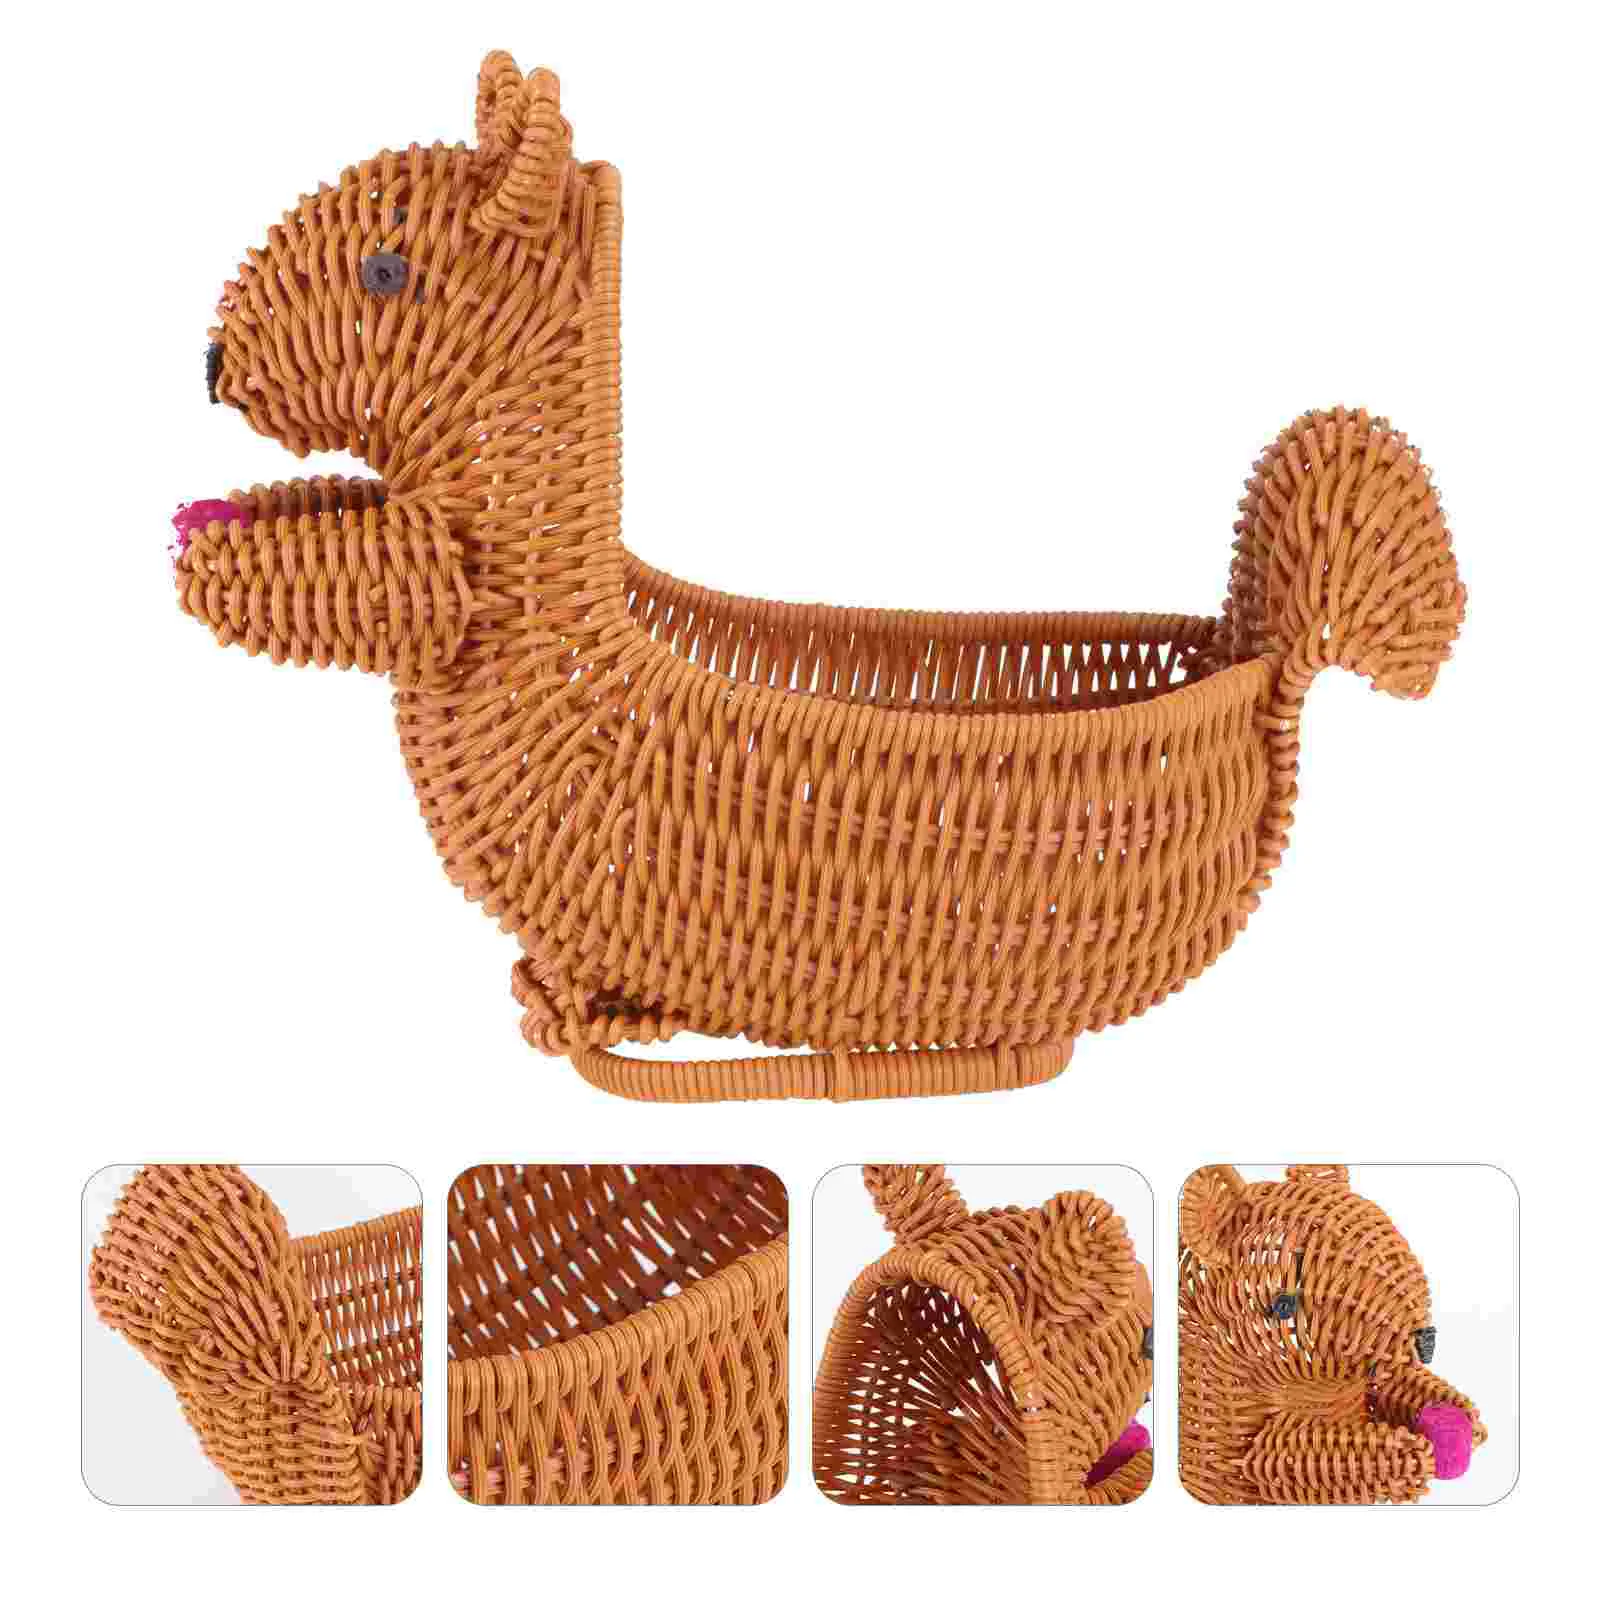 

Basket Fruit Woven Wicker Rattan Storage Bowl Serving Bread Tray Snack Decorative Baskets Squirrel Weaving Candy Weave Bowls